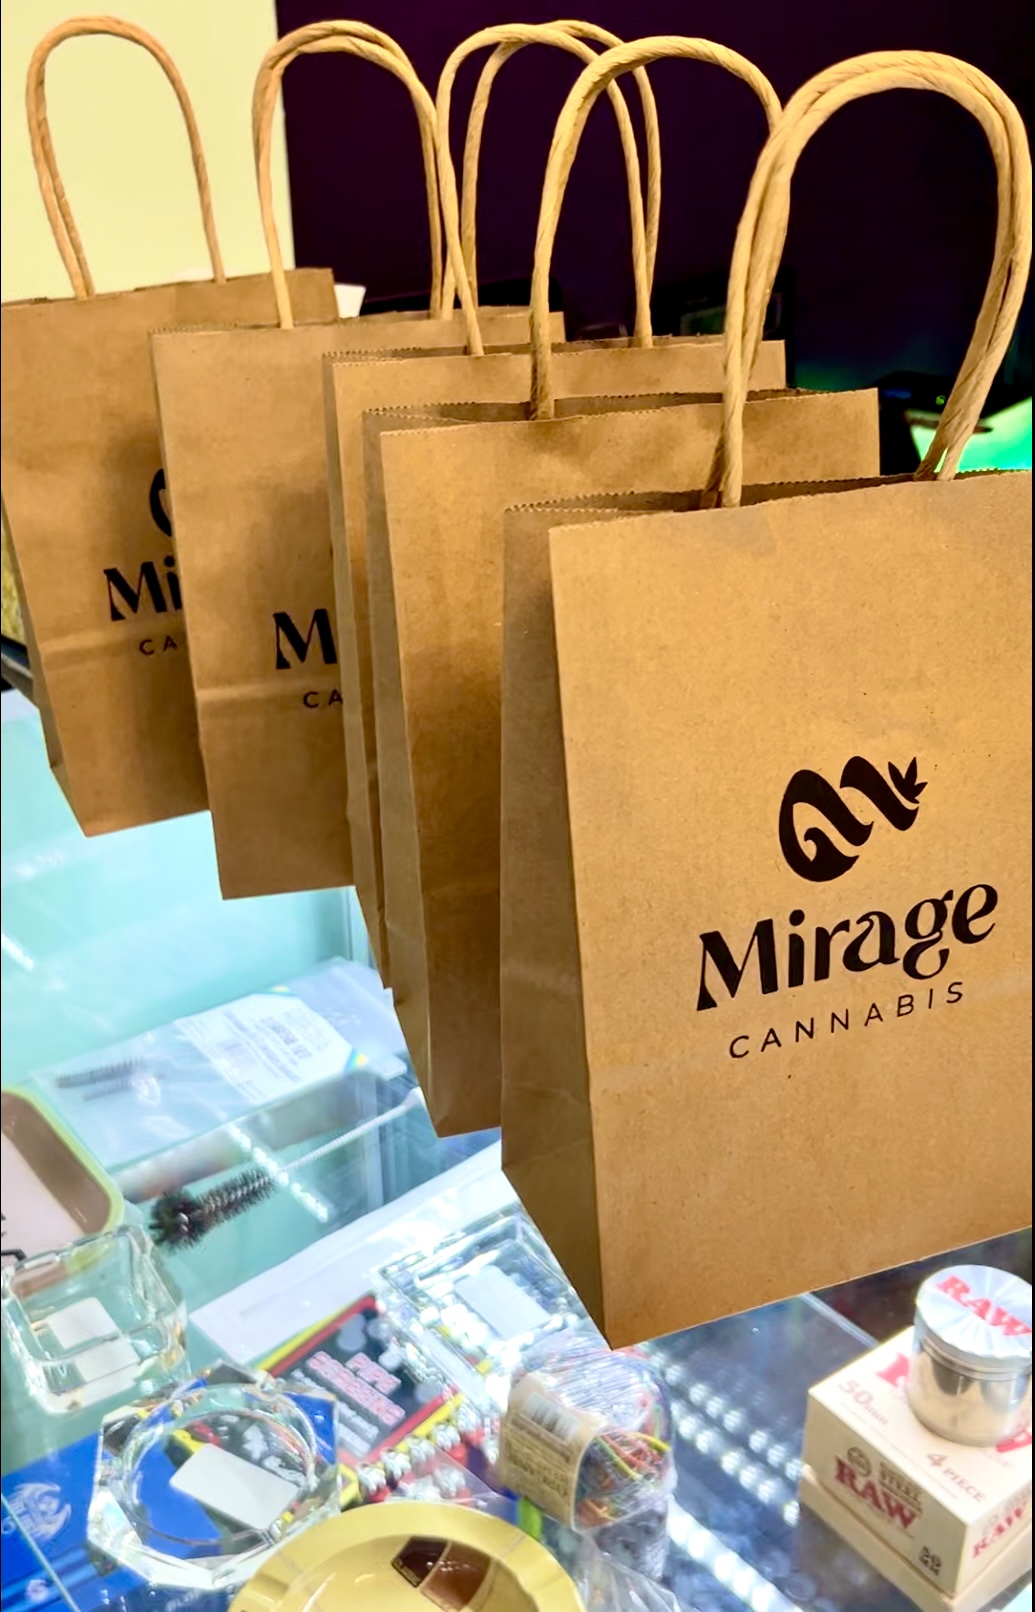 Mirage: Leader in Cannabis Delivery in Toronto